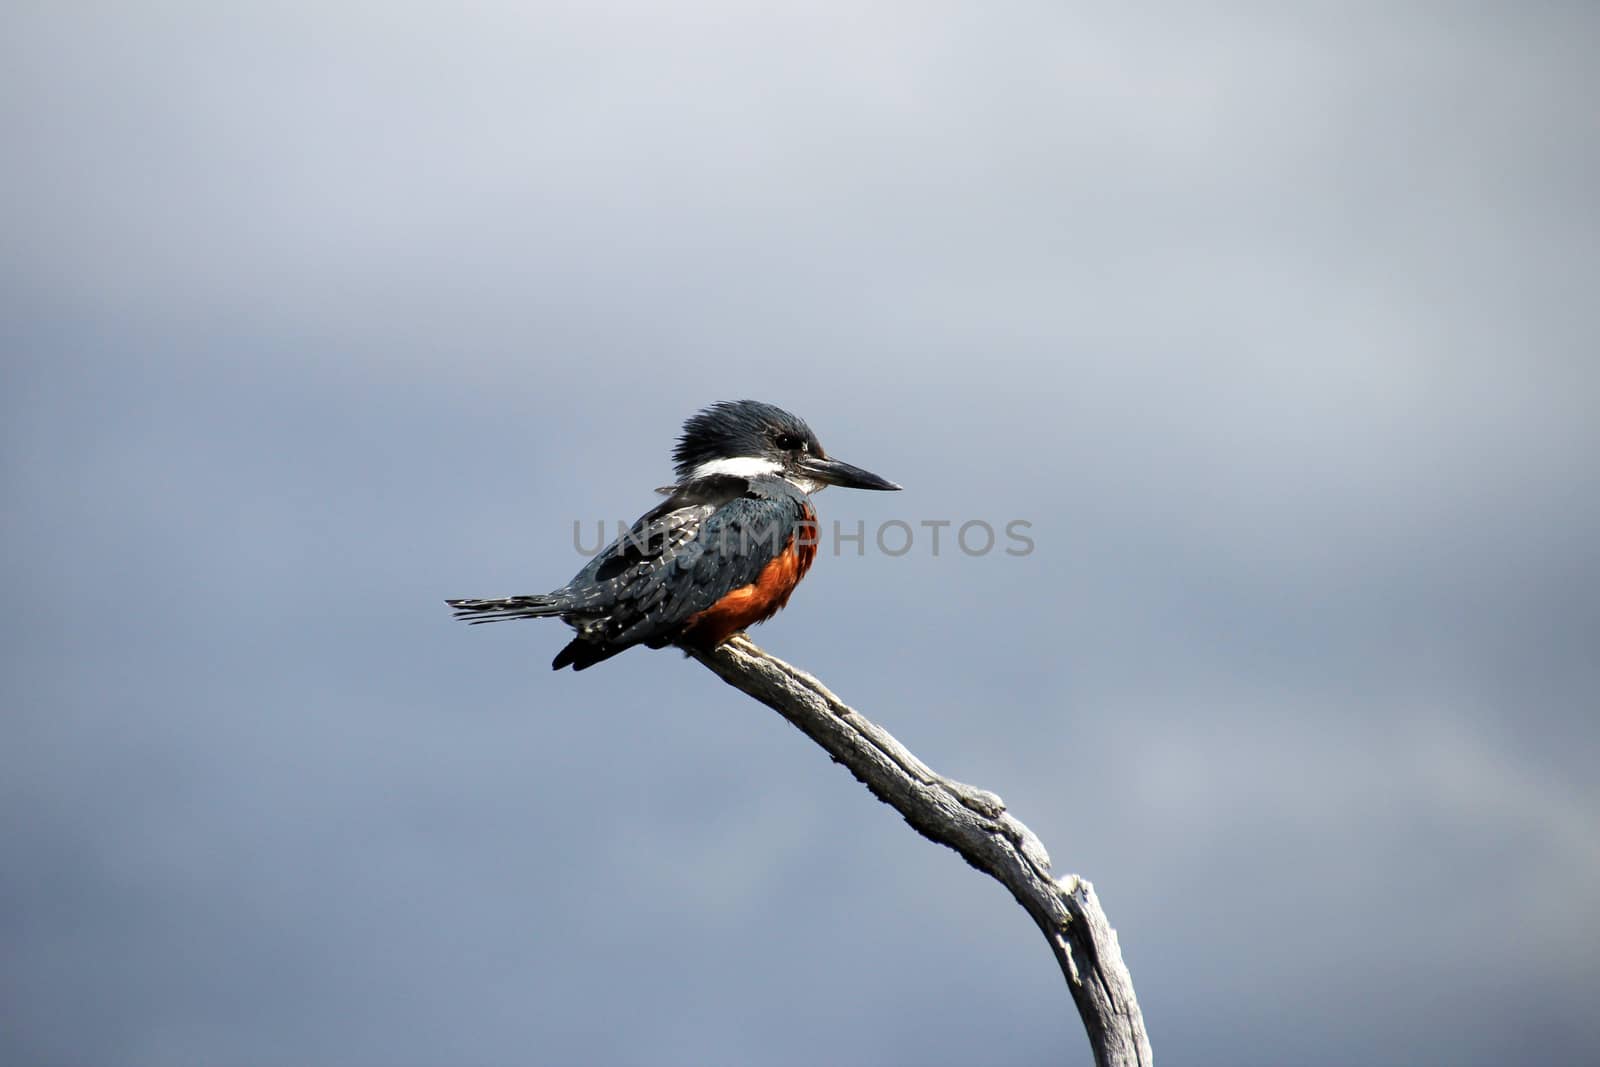 Beautiful Ringed Kingfisher, megaceryle torquata, on a tree branch, Tierra Del Fuego, Patagonia, Argentina by cicloco